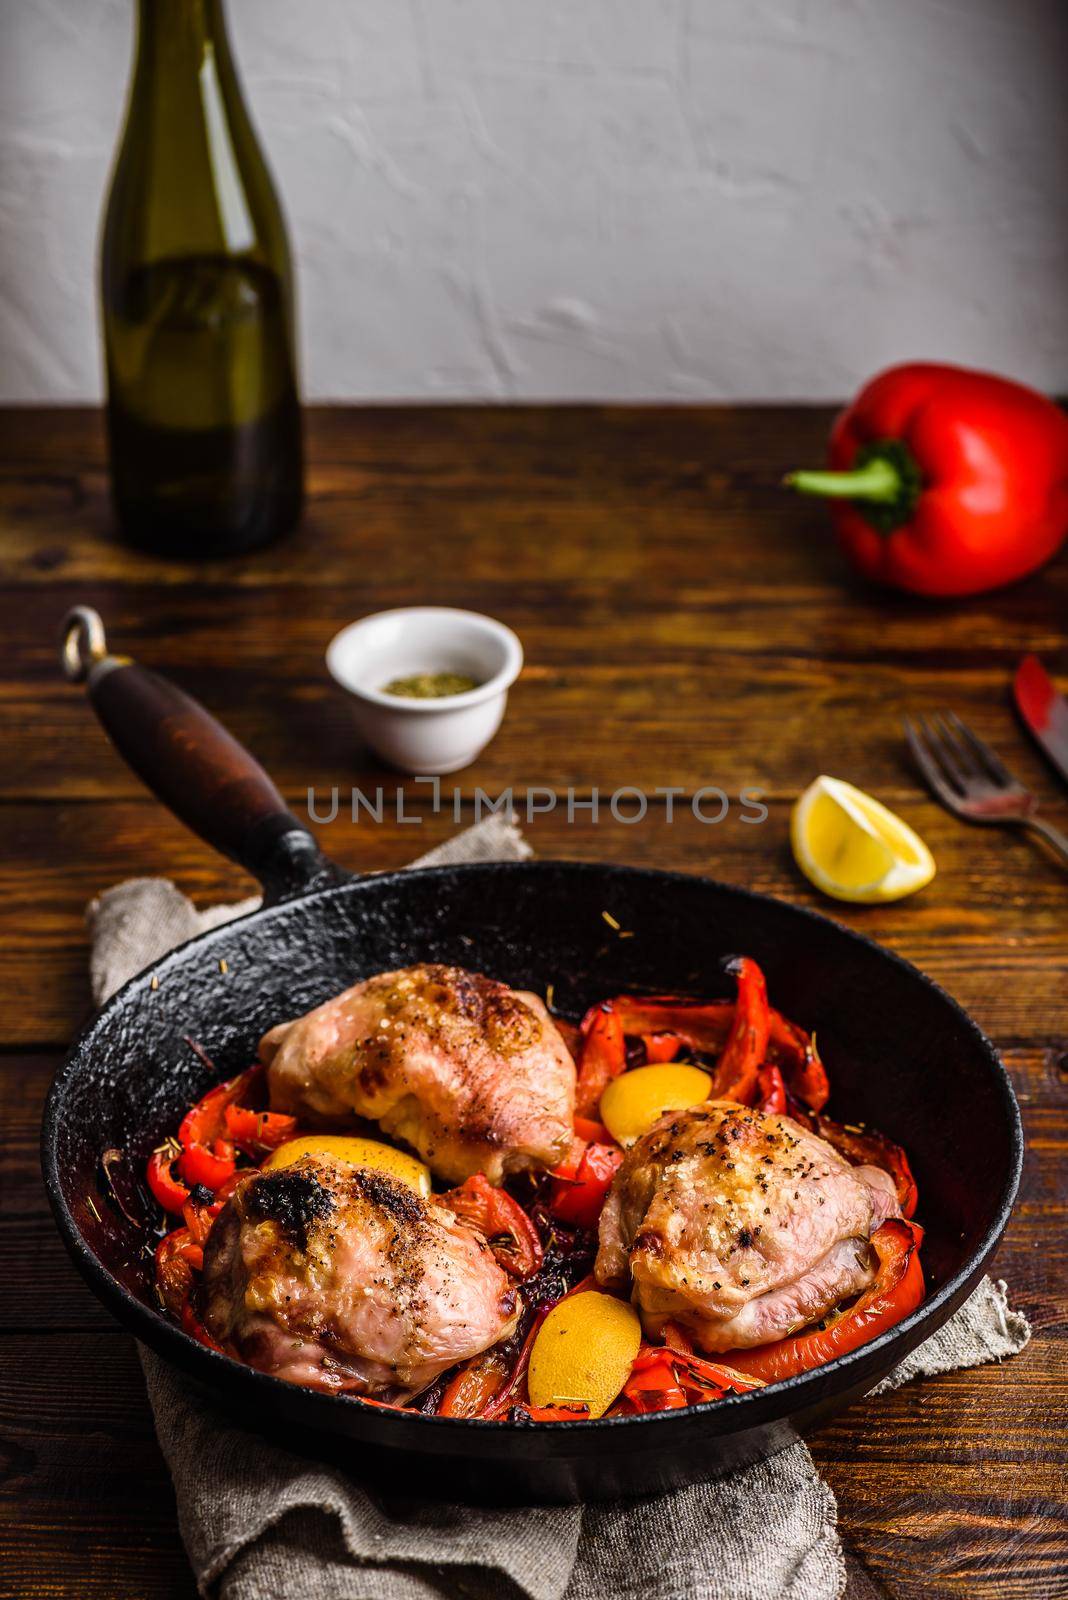 Chicken thighs baked with red bell peppers, rosemary and lemon in cast iron skillet.